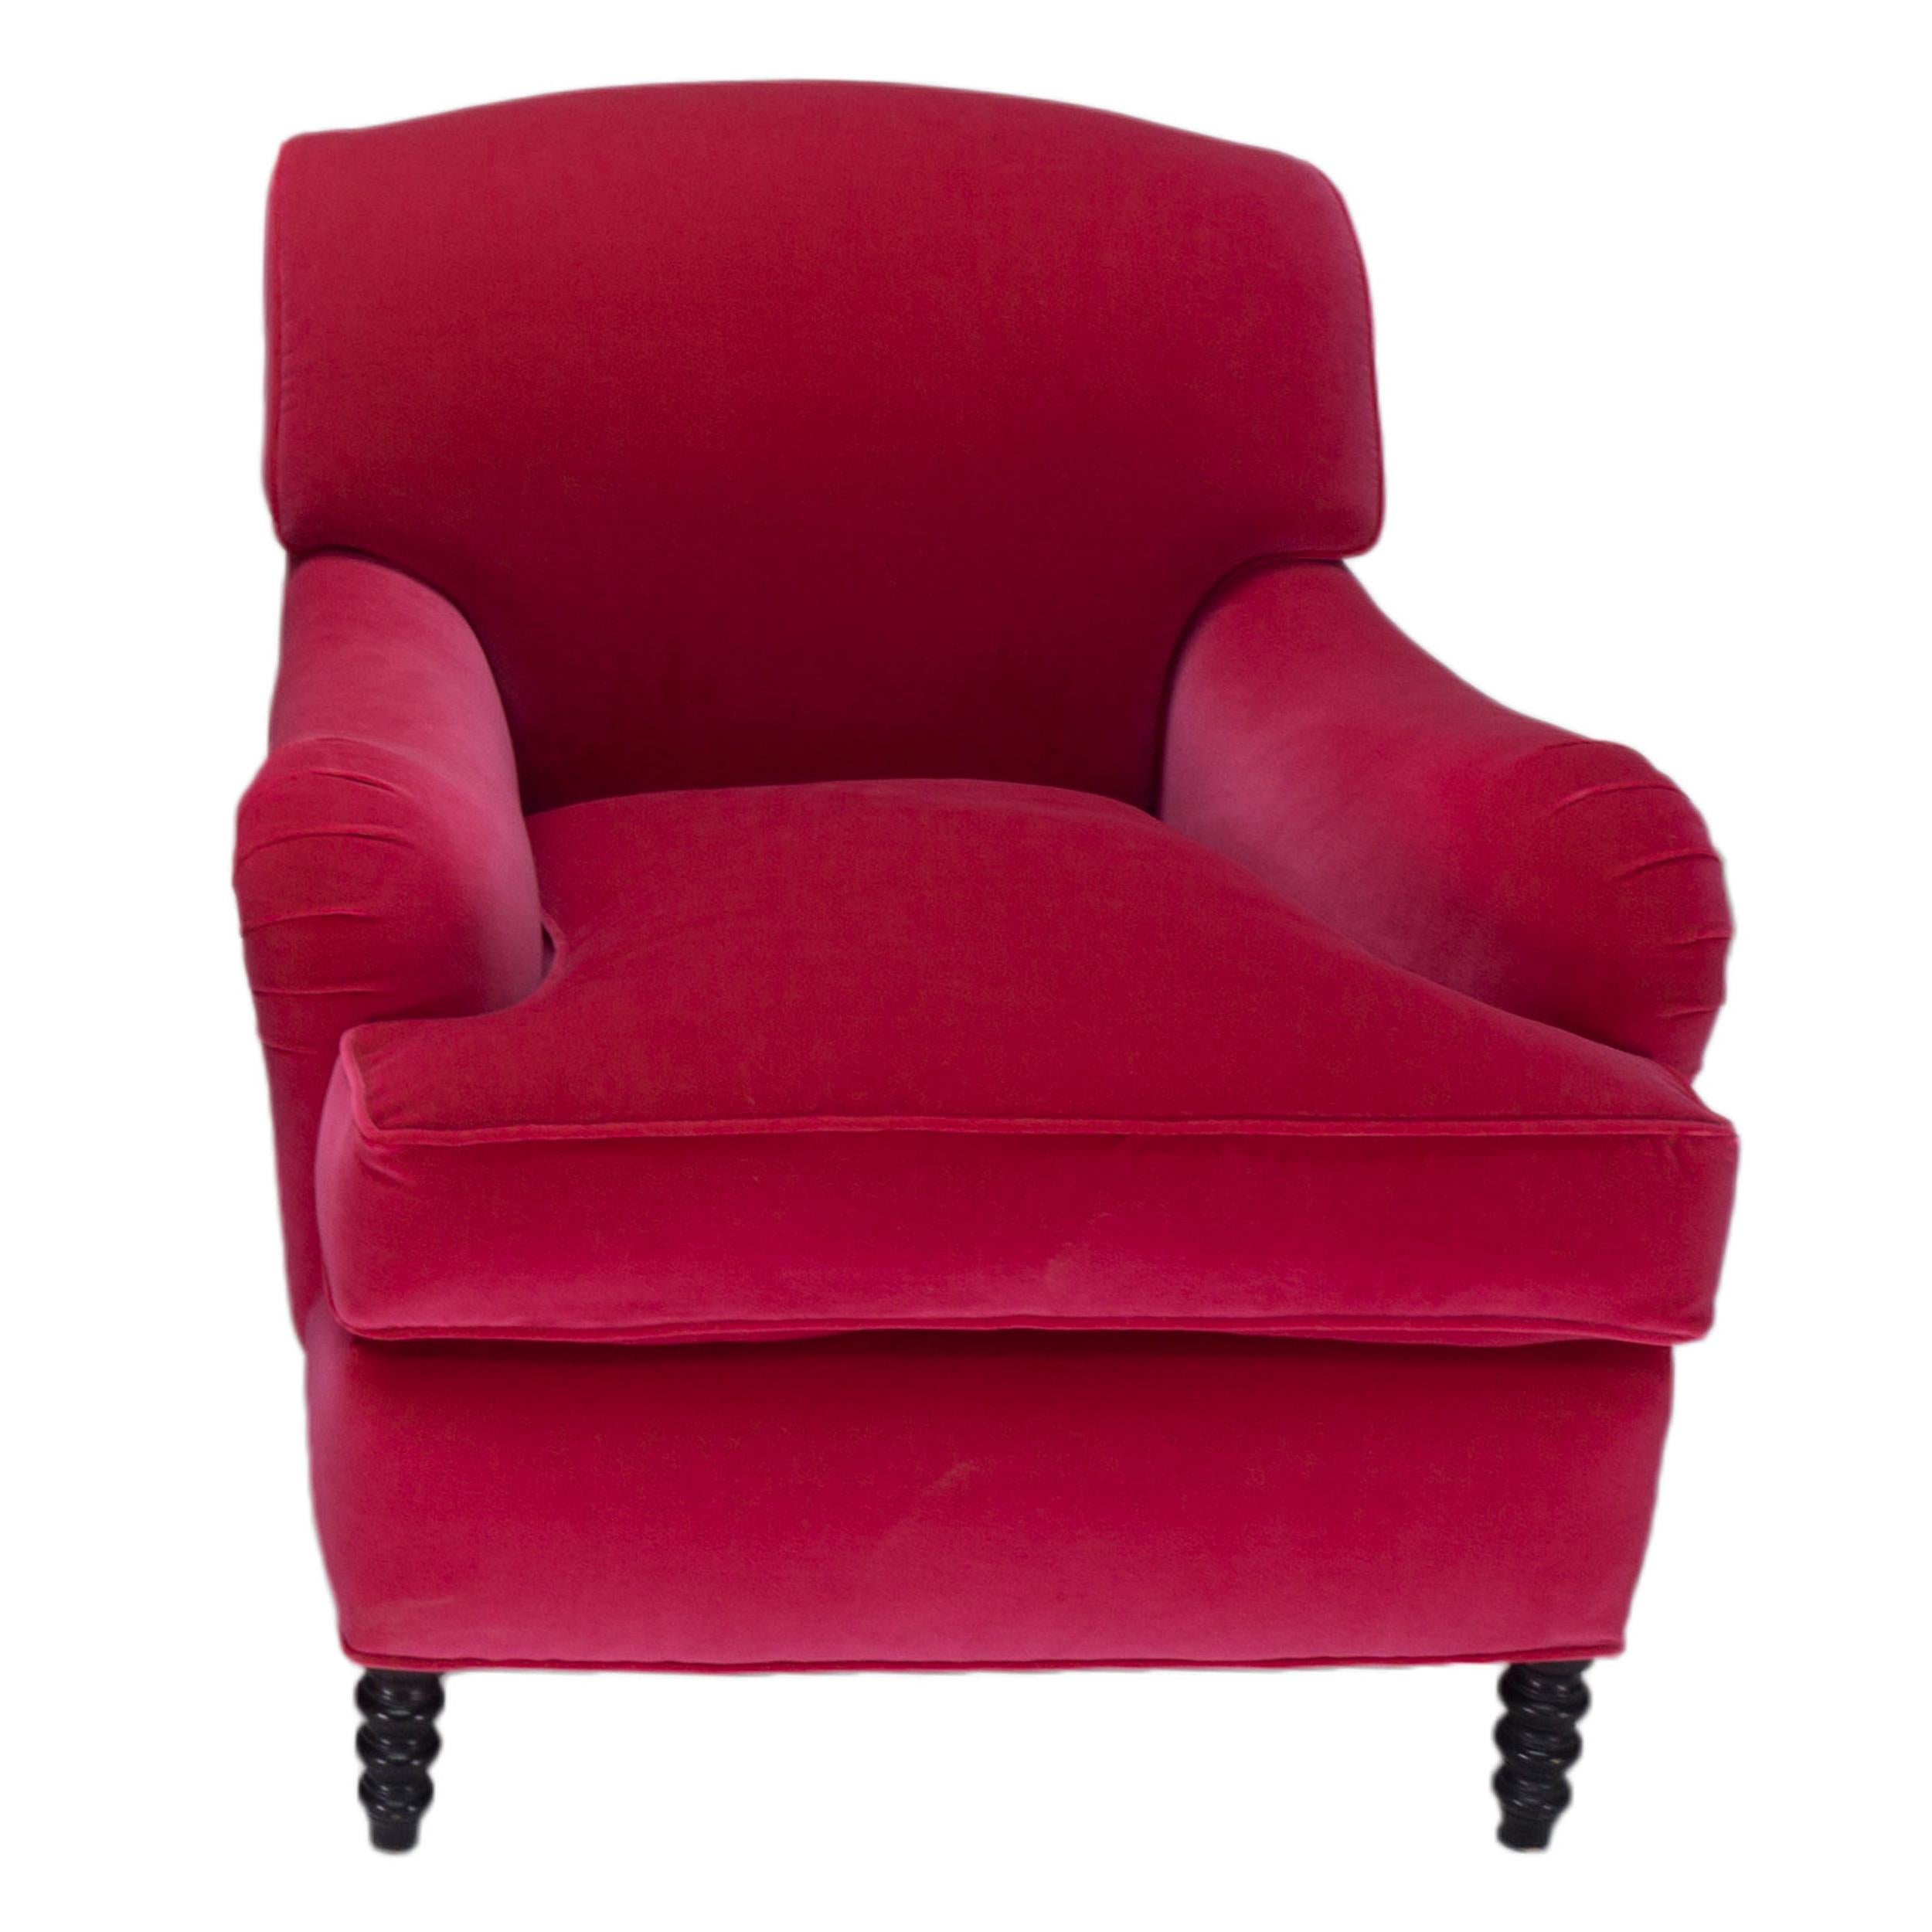 Contemporary take on English Roll Arm-style chair with a tight back and loose seat cushion. The chair also features spool turned legs at the front and a deep seat. Shown in 100% cotton thick pile Fuchsia Velvet. Hand-built to order and customizable